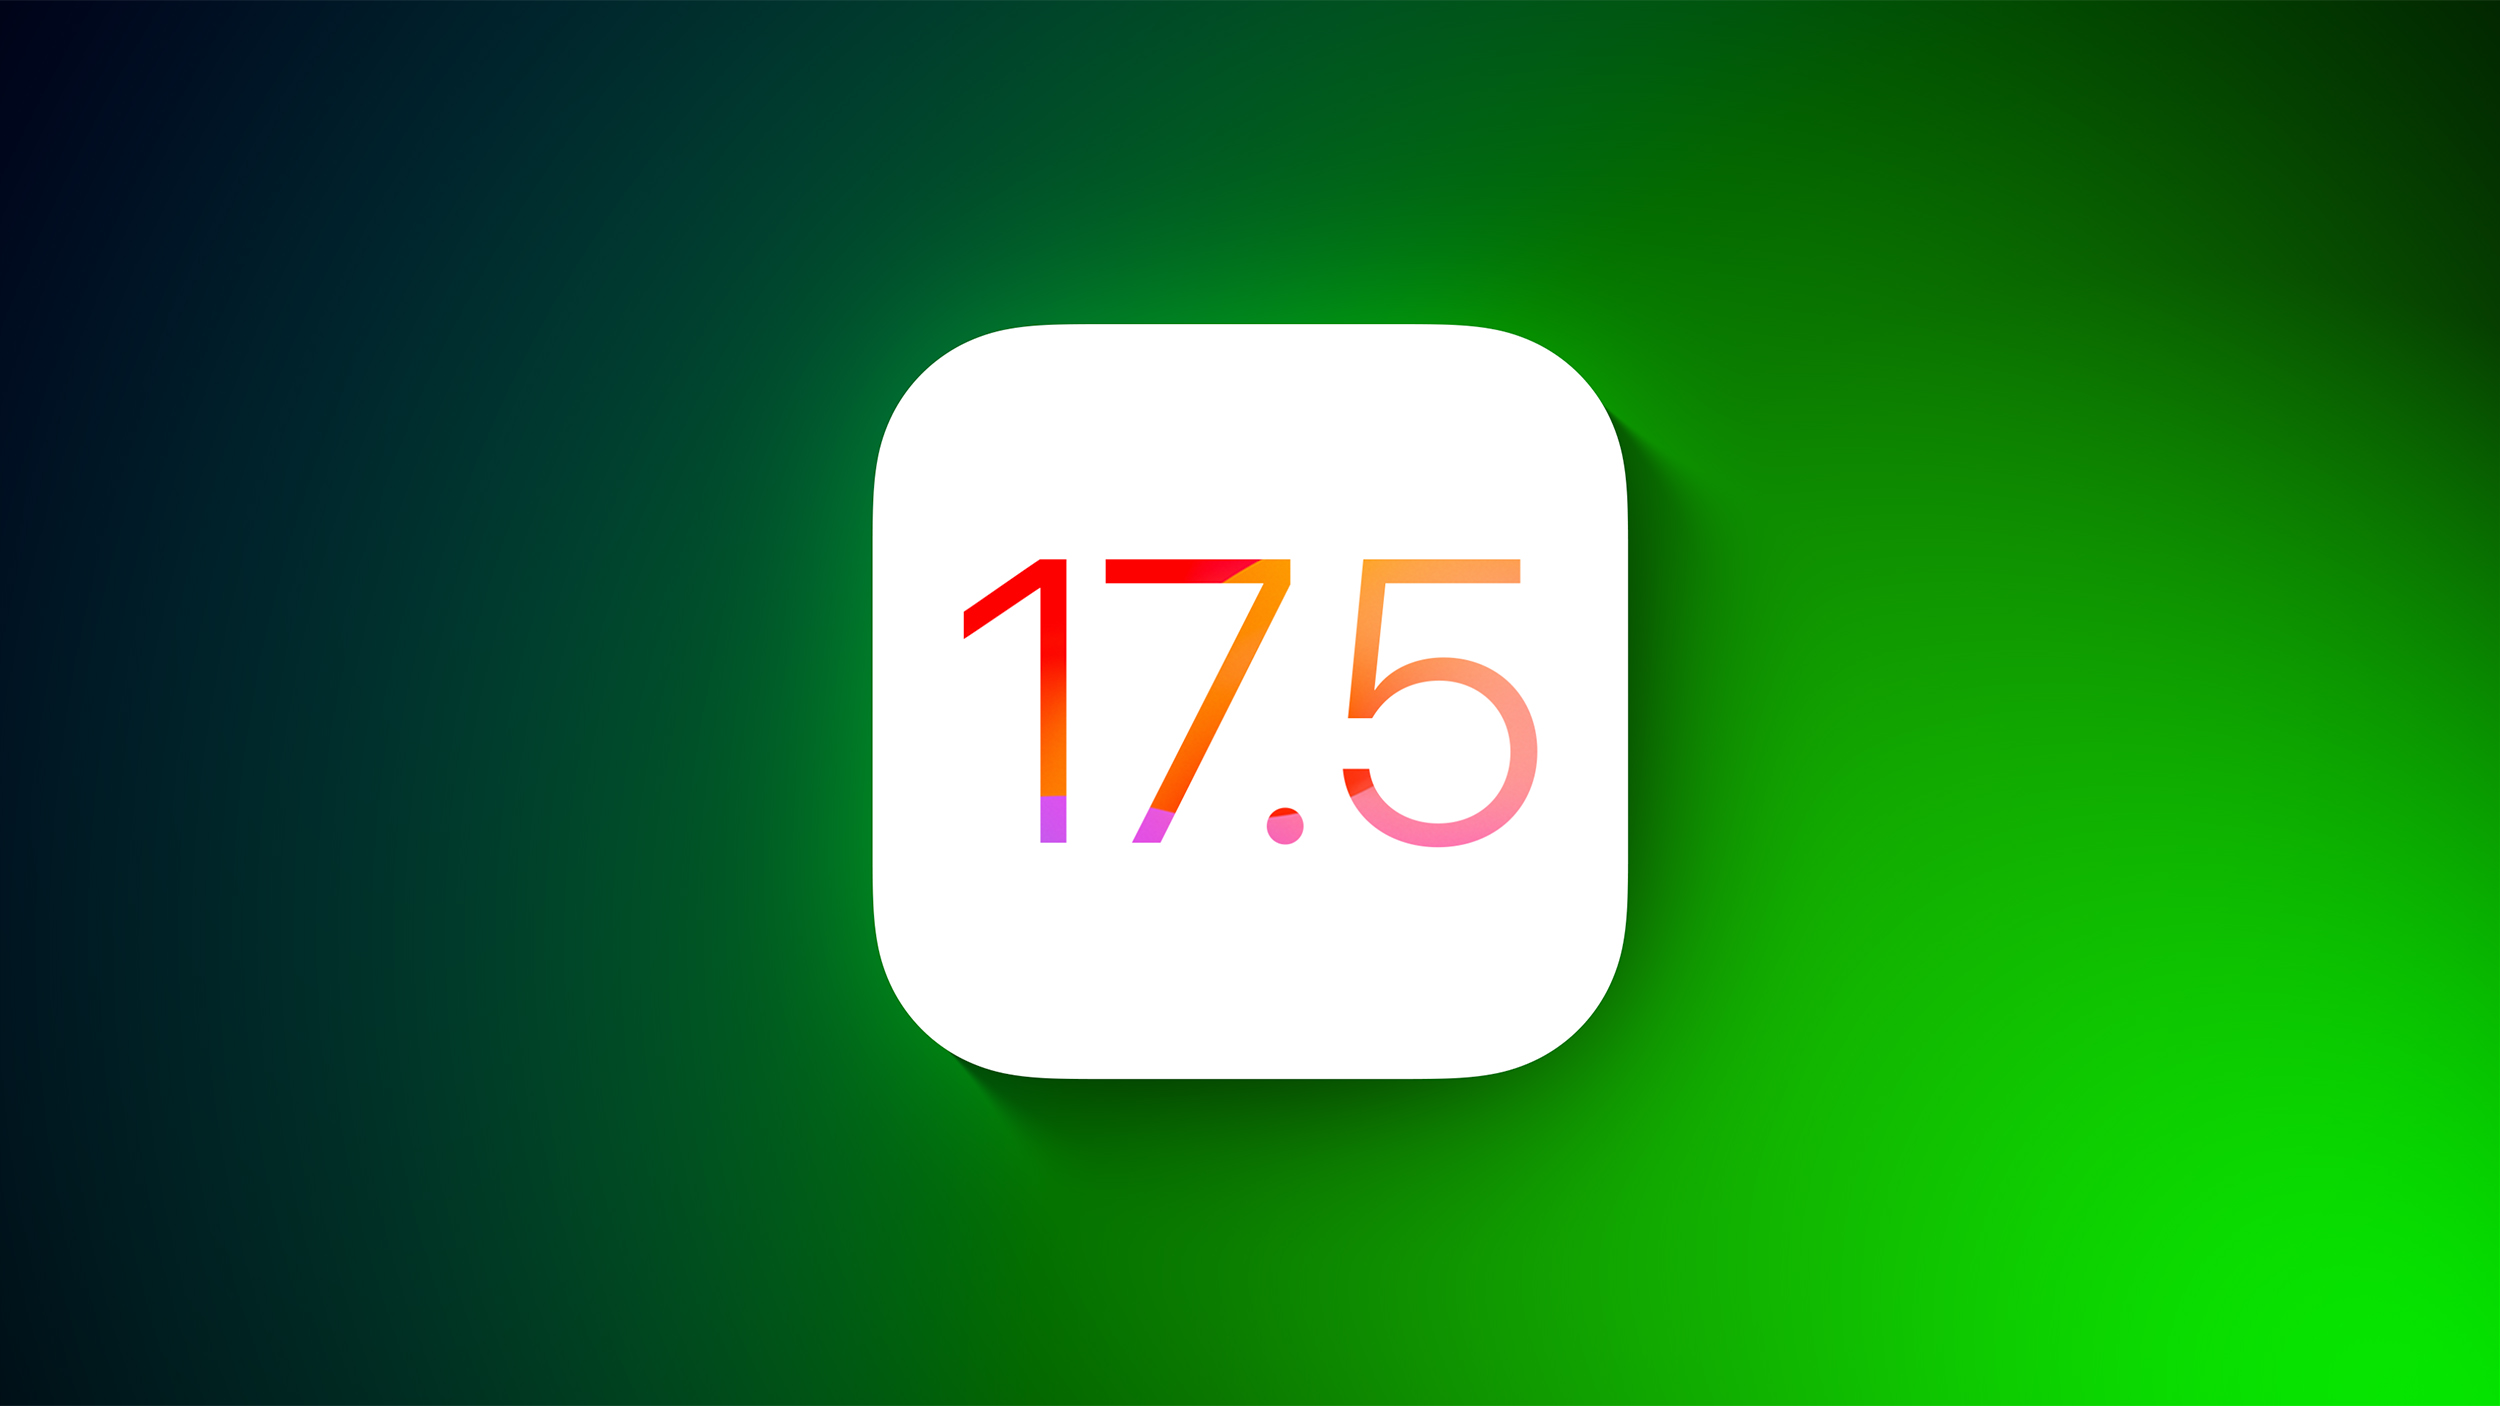 When Will Apple Release the iOS 17.5 Beta?